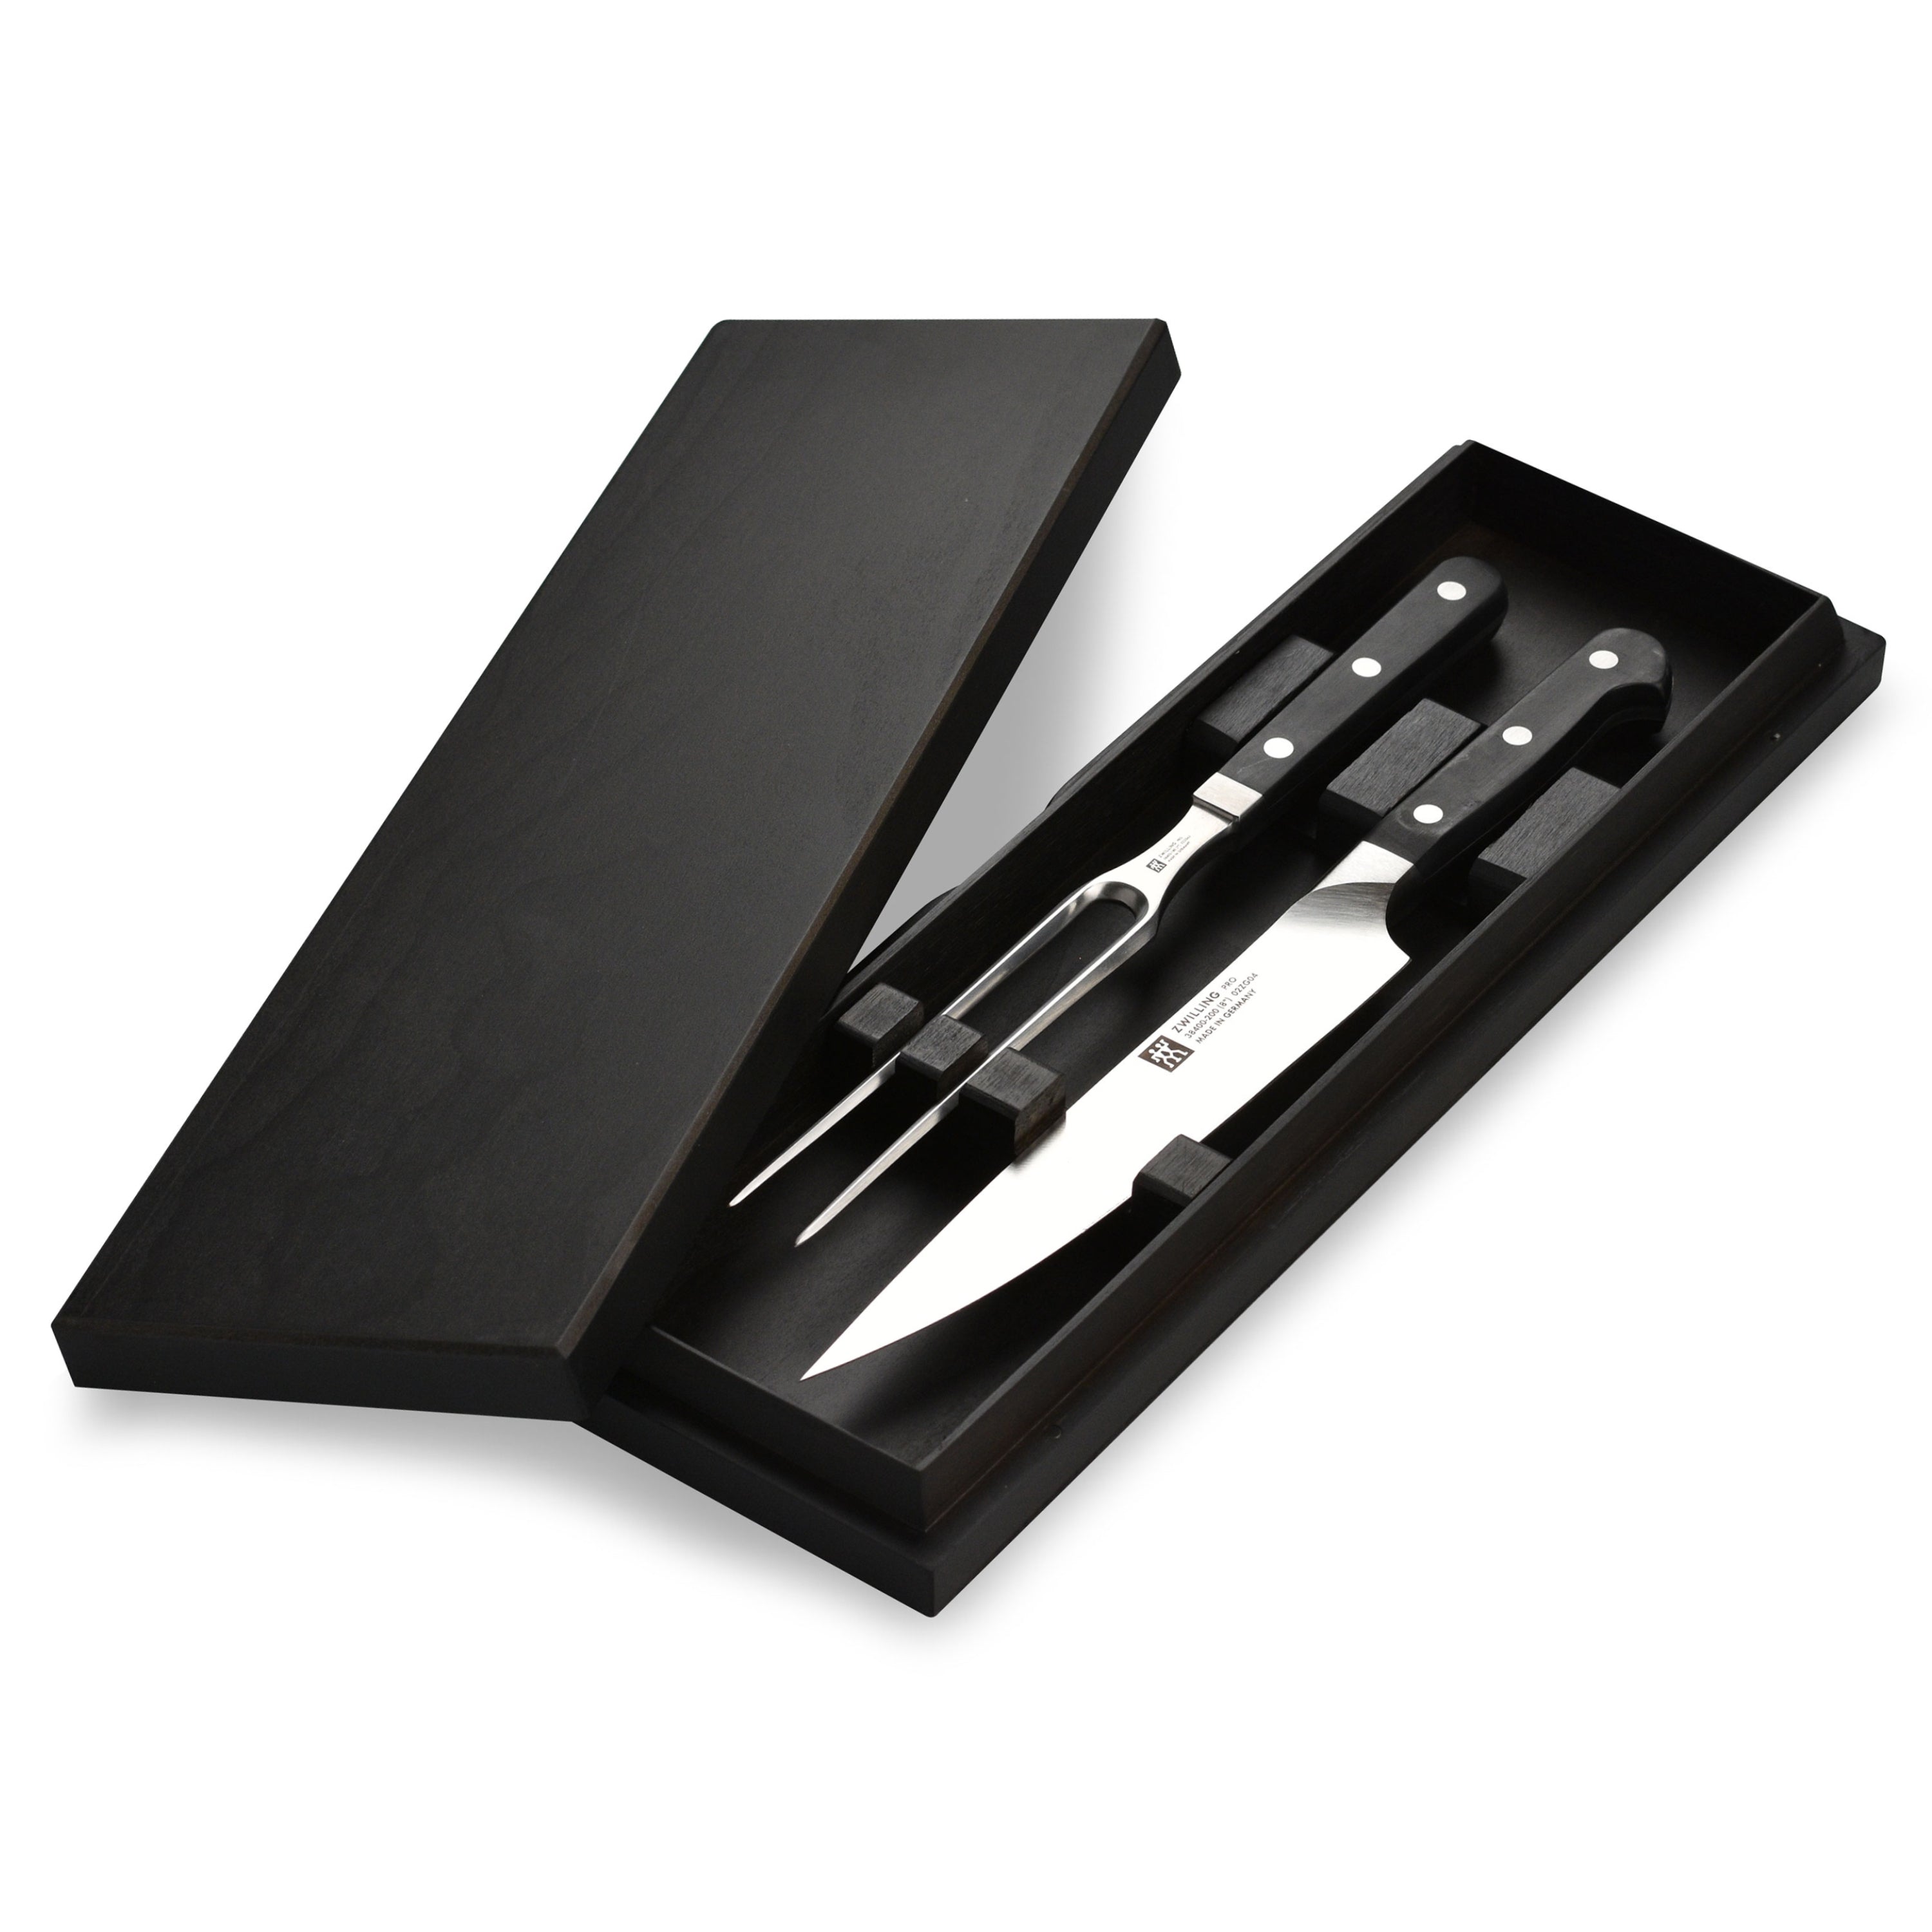  Viking Culinary Professional 2-Piece Carving Set, 8